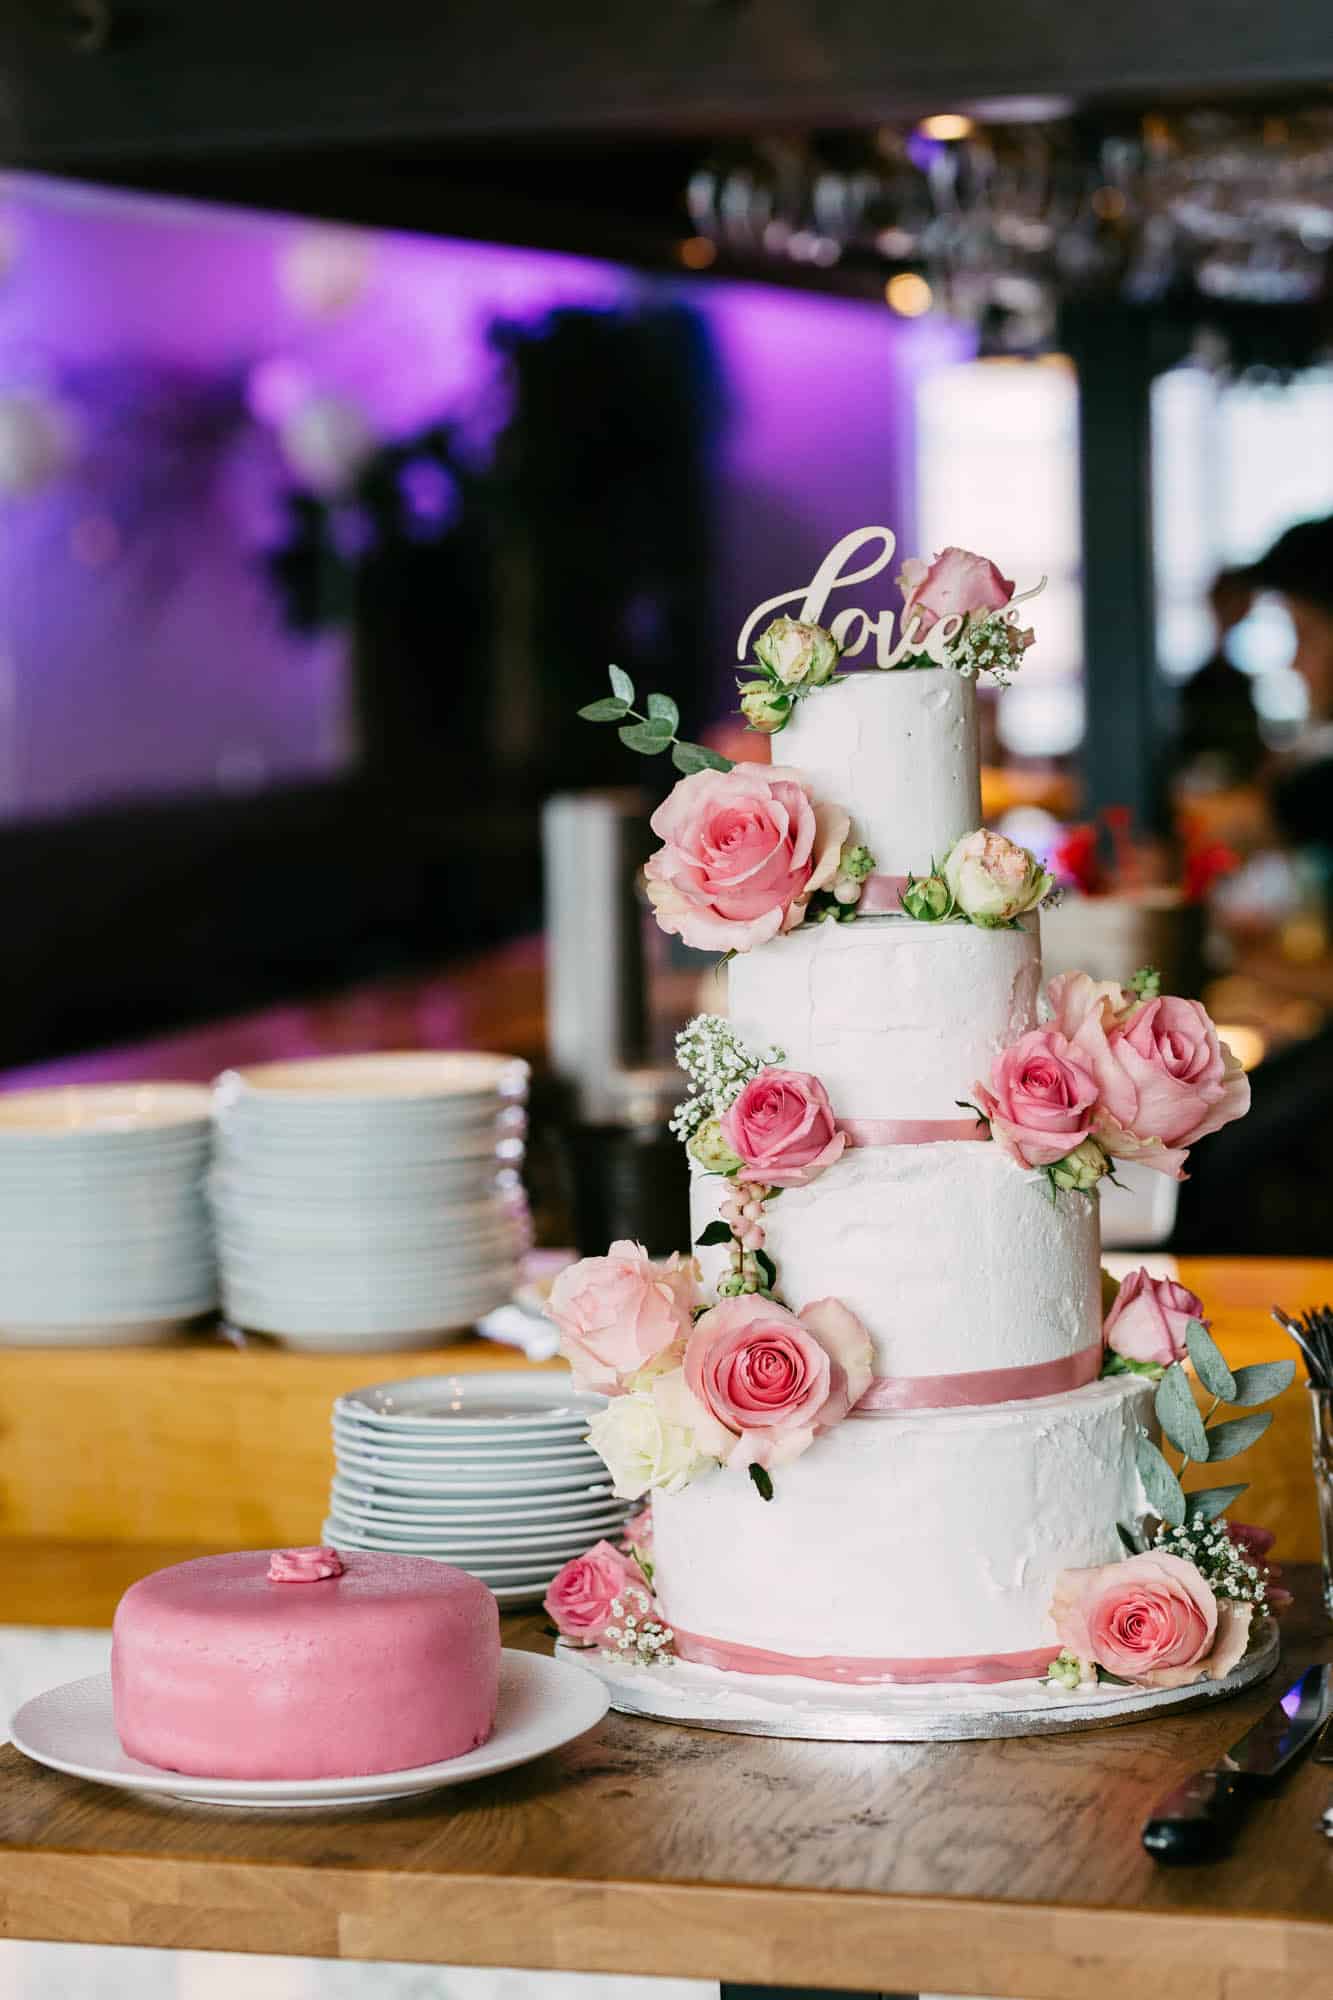 Wedding cakes sit on a wooden table.